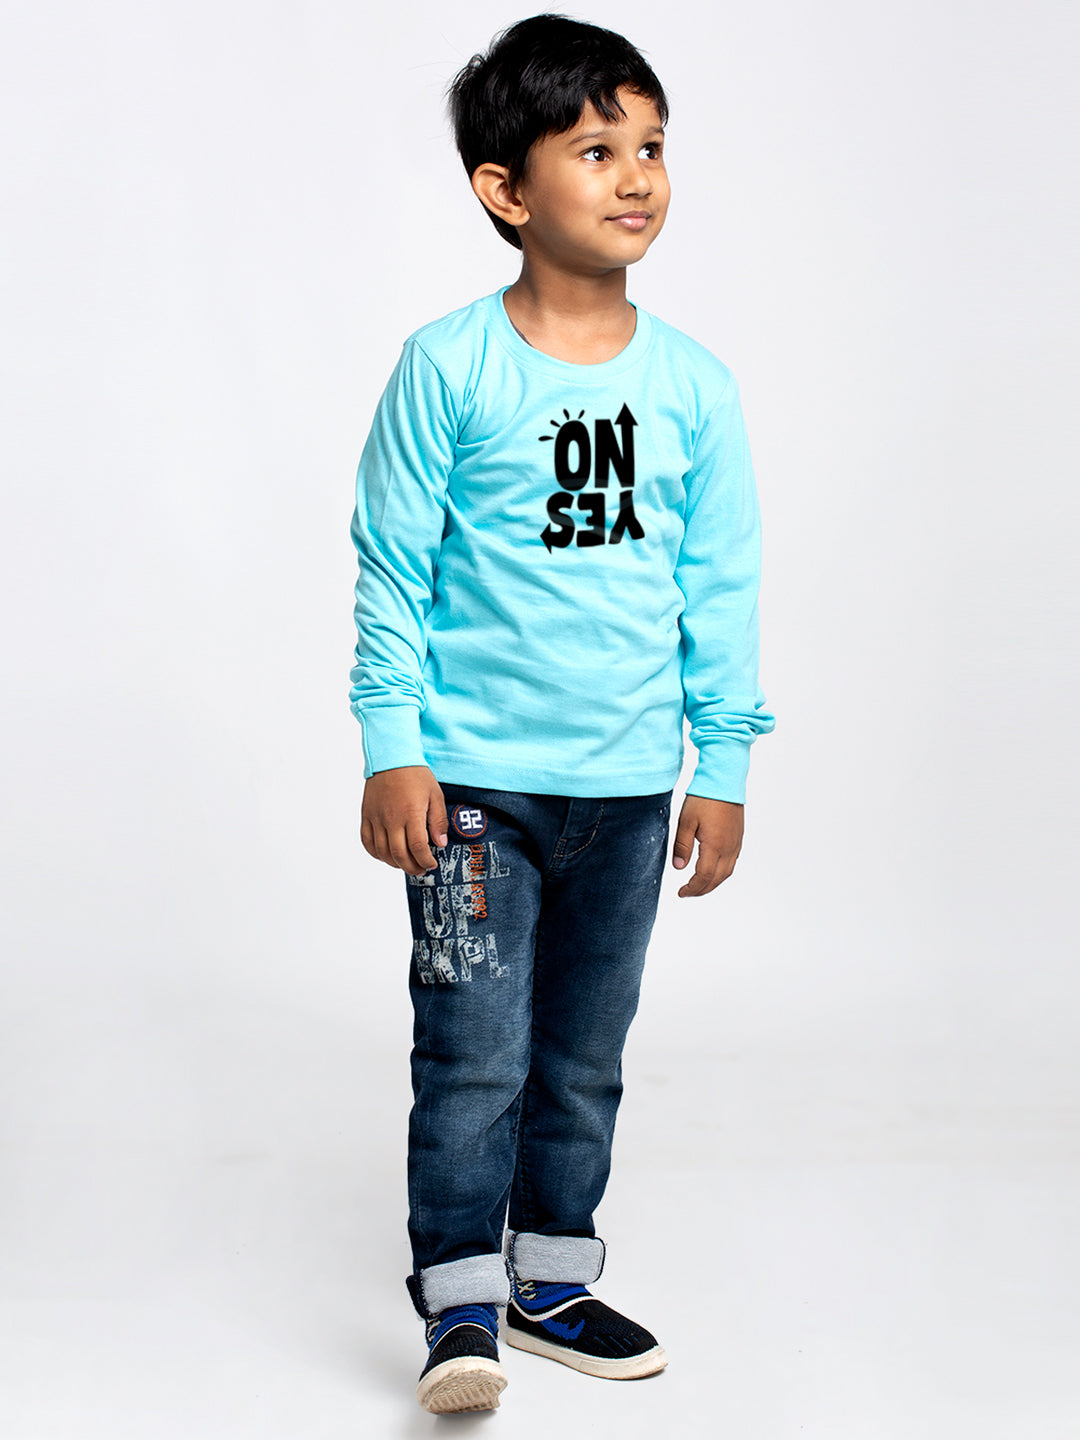 Kids No Yes printed full sleeves t-shirt - Friskers